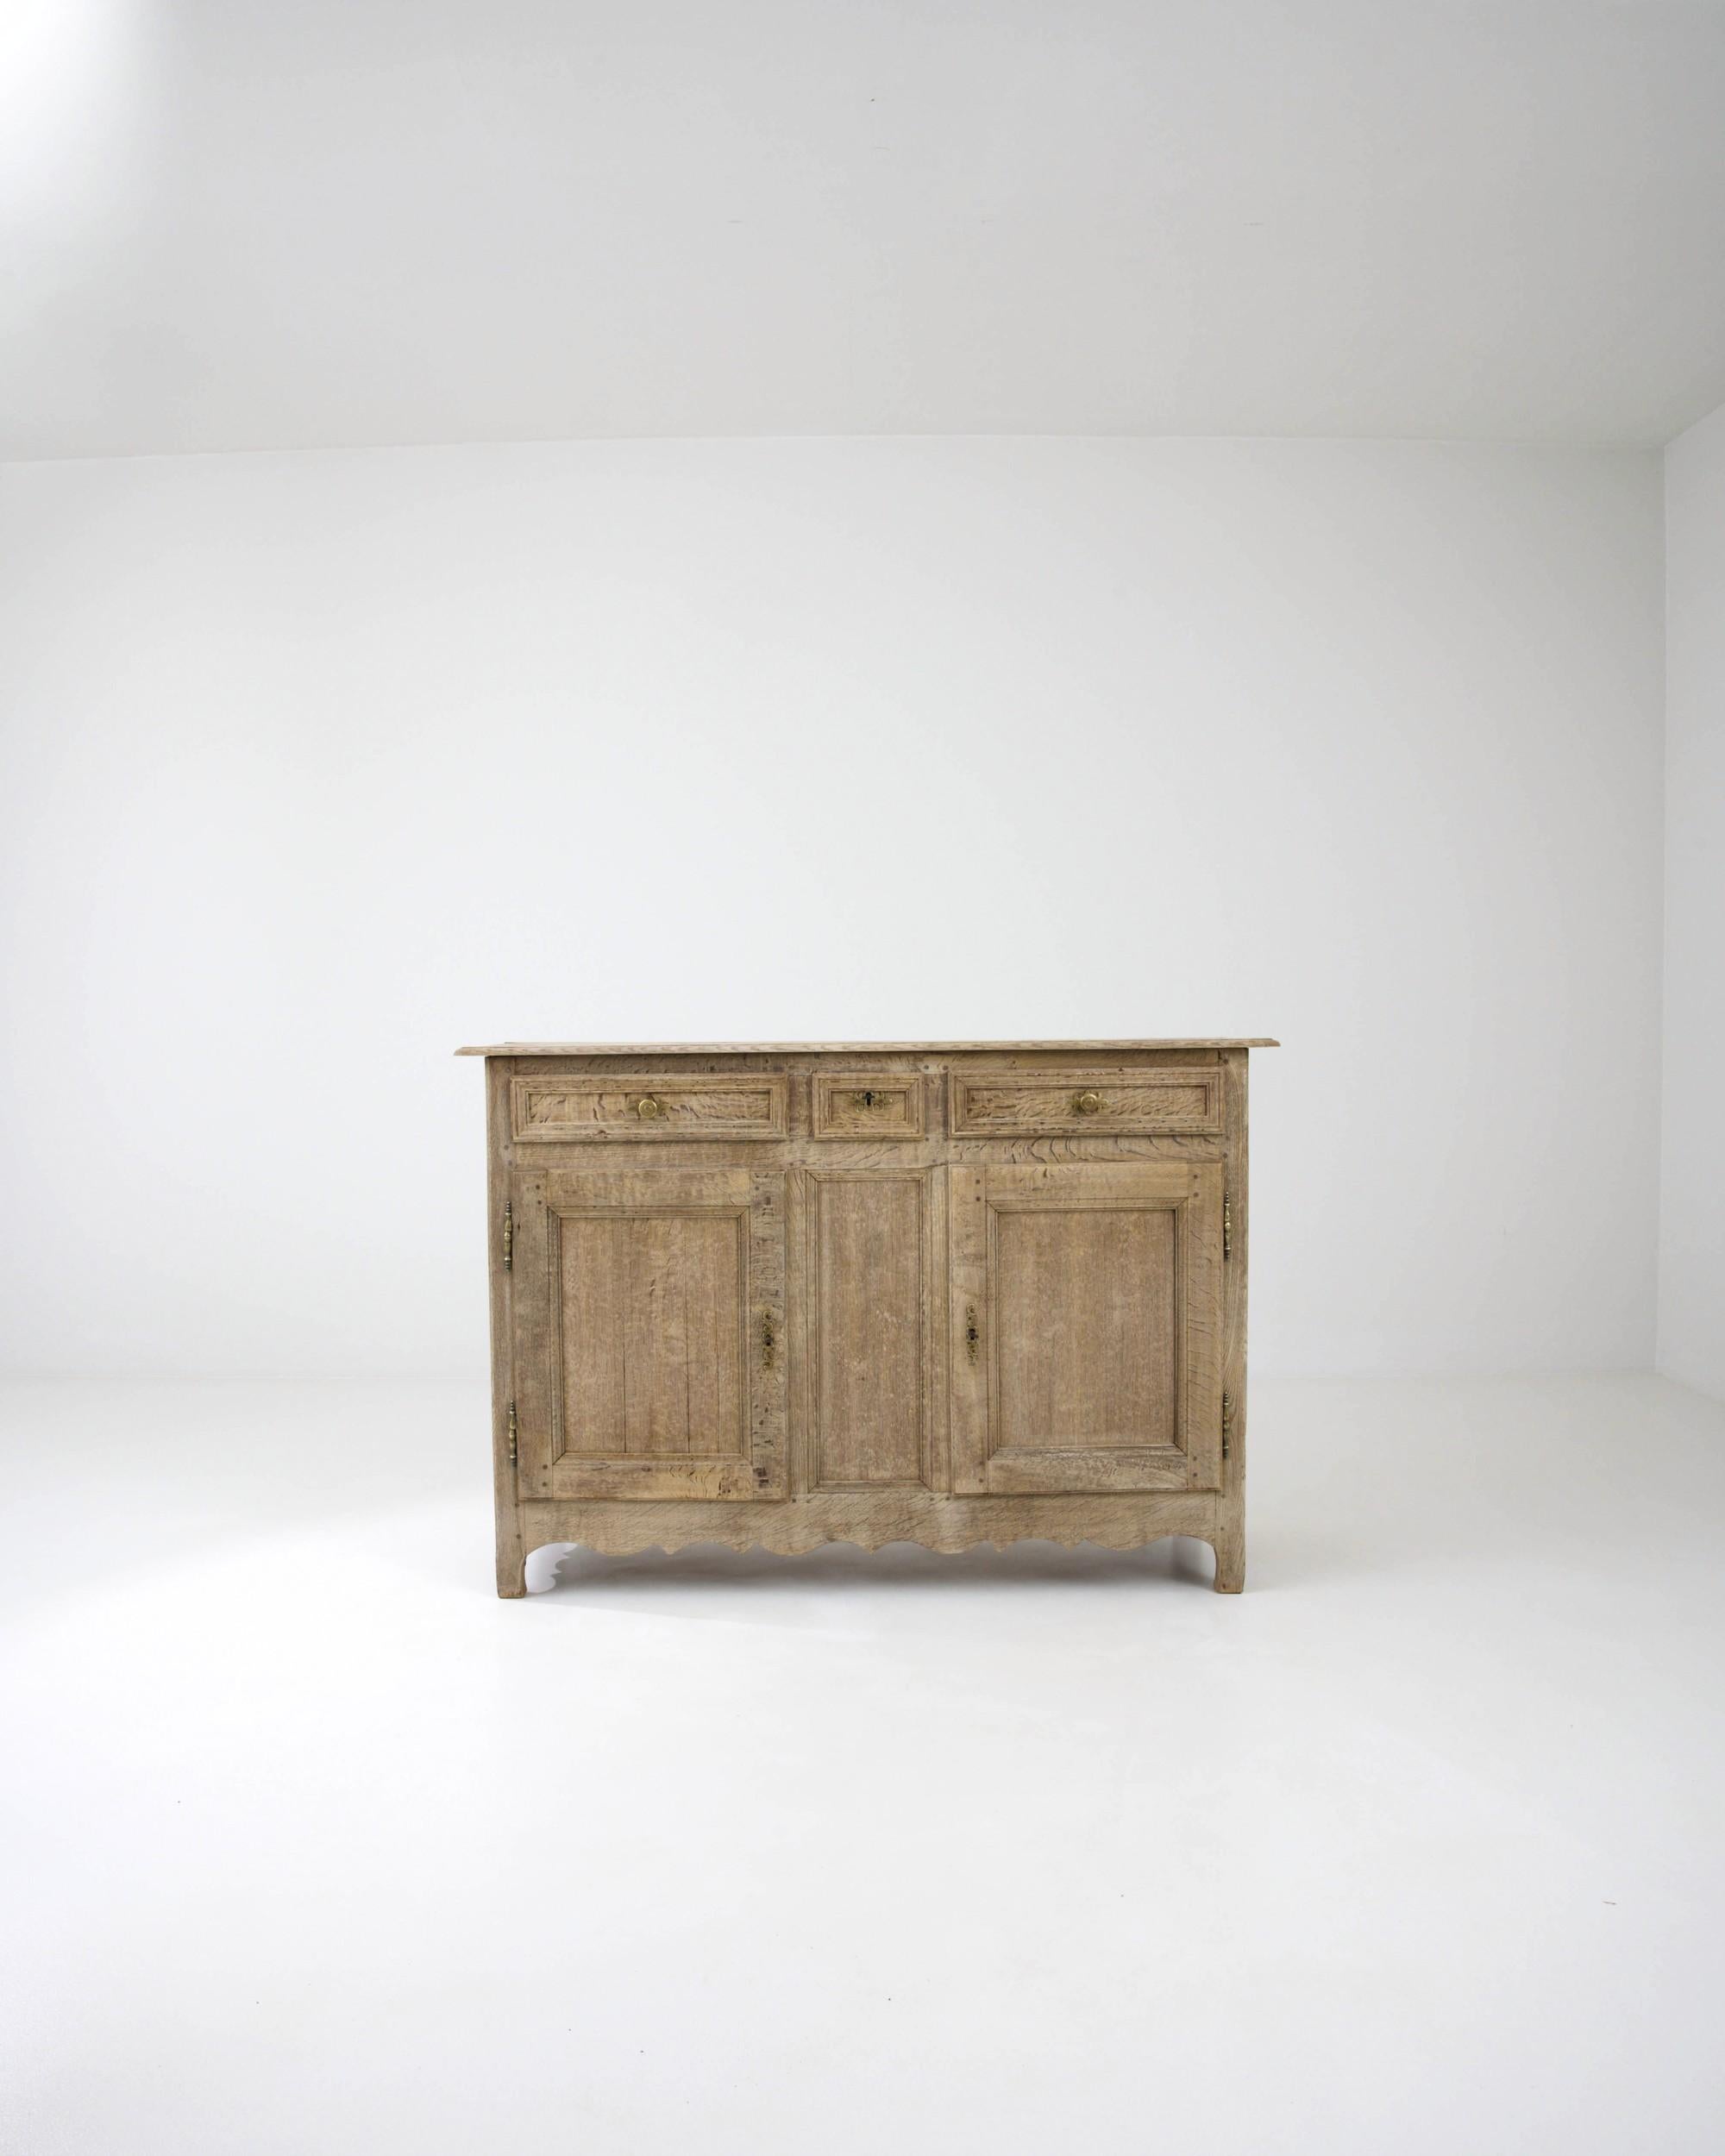 A quintessential Country French buffet cabinet, made circa 1800. The simple geometric shape recalls a countryside local and the time tested approach of regional French cabinet makers. Combining earthy colors and elevated craftsmanship, this buffet